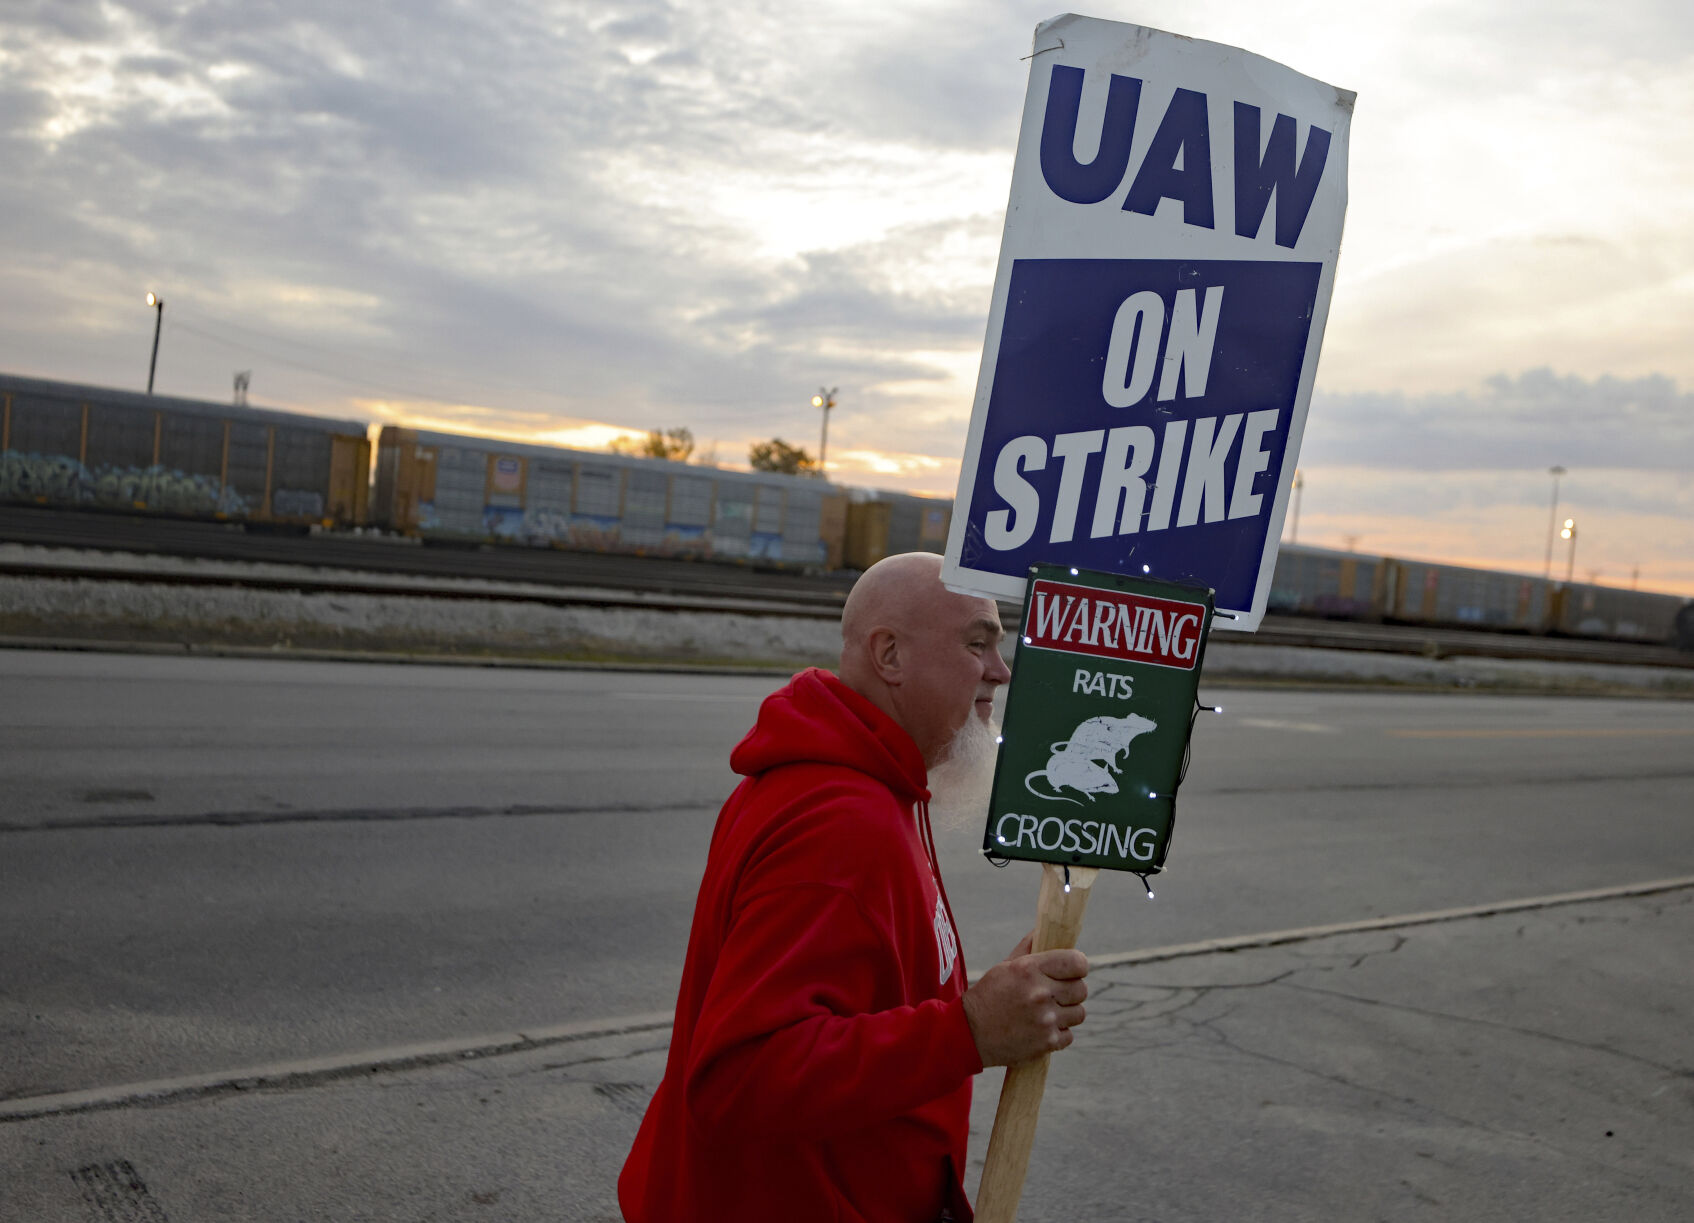 <p>File - Dan Back, a United Auto Workers Local 12 member, pickets during the ongoing UAW strike at the Stellantis Toledo Assembly Complex on Thursday, Oct. 26, 2023, in Toledo, Ohio. Members of the United Auto Workers union moved closer to approving a contract agreement with Stellantis on Friday, Nov. 17, as two large factories in Detroit voted overwhelmingly for the deal. (Kurt Steiss/The Blade via AP, File)</p>   PHOTO CREDIT: Kurt Steiss - member, ASSOCIATED PRESS